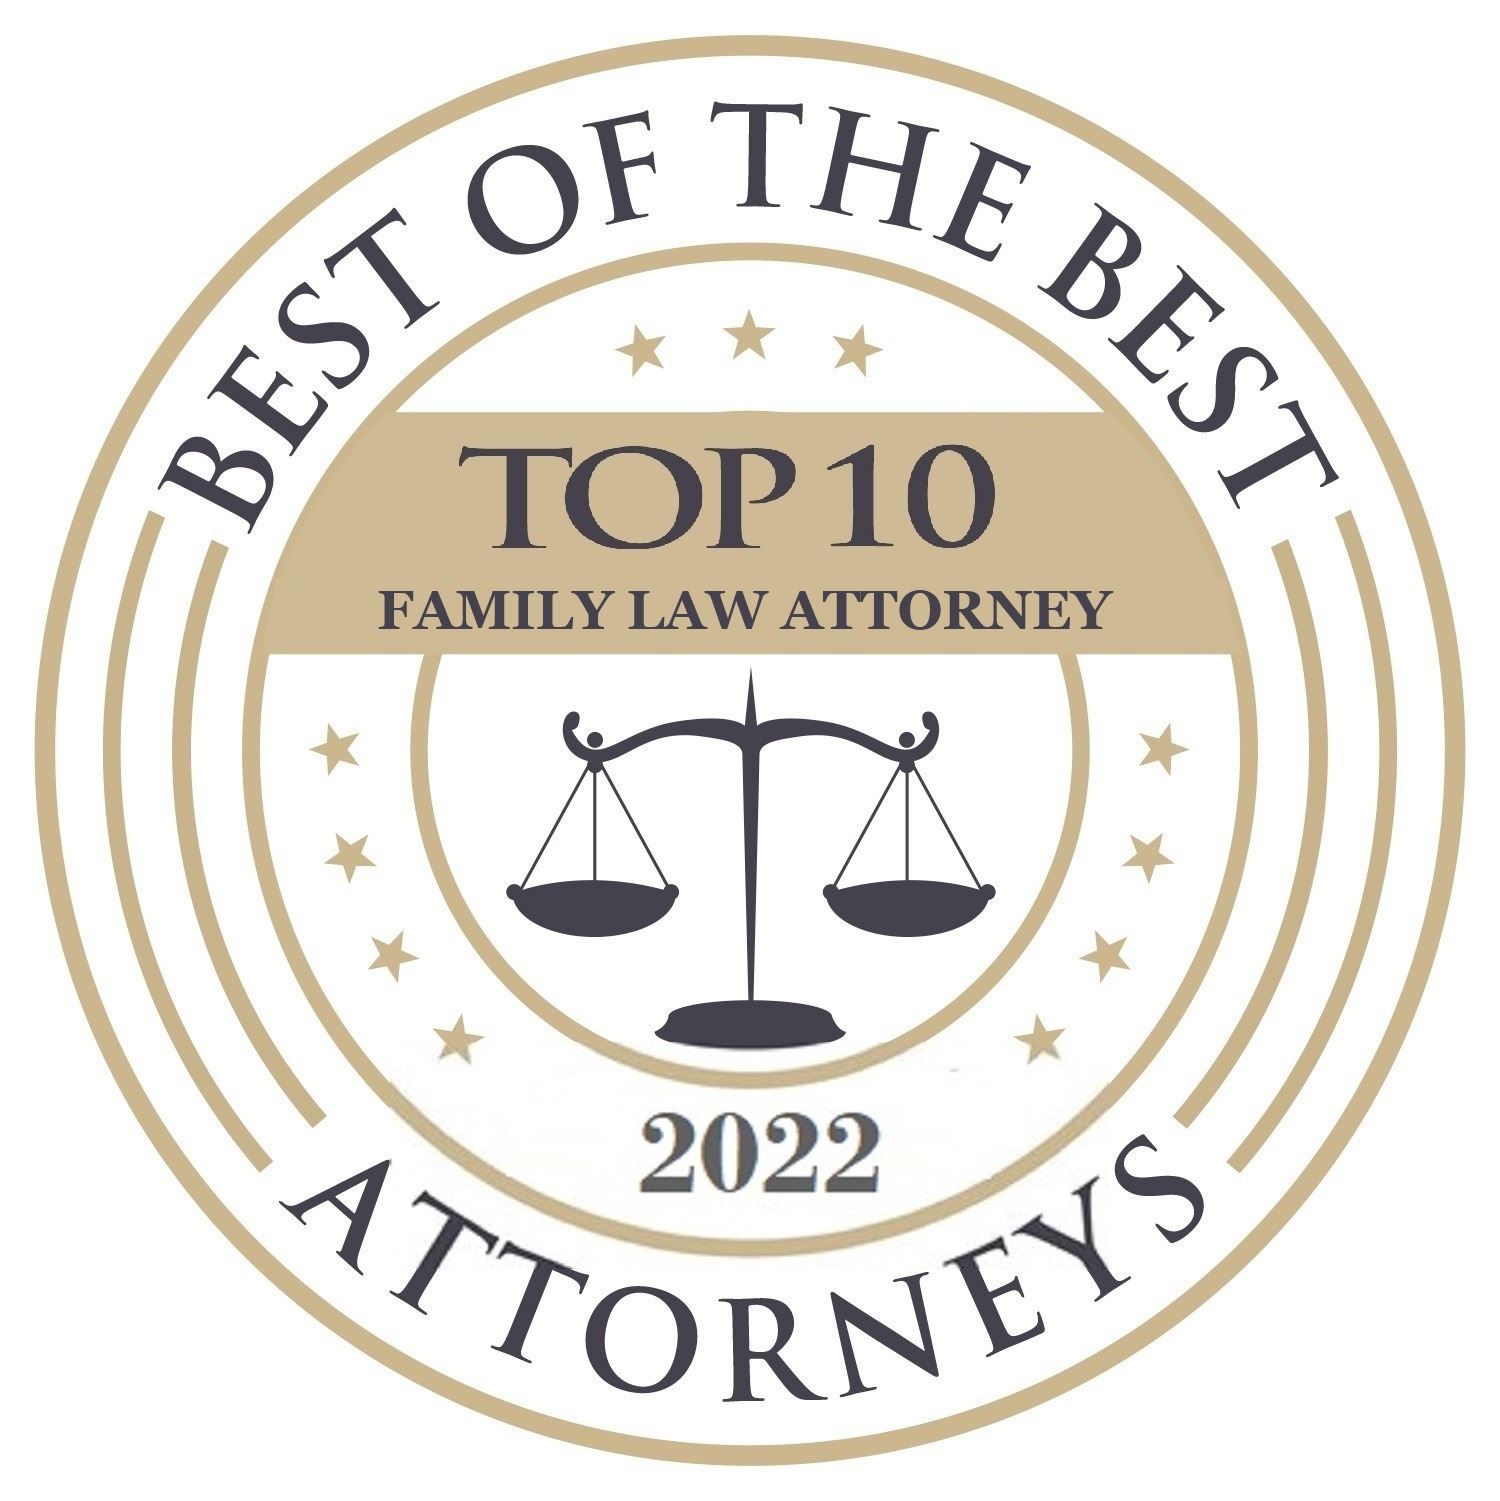 Best of the Best Top 10 Family Law Award